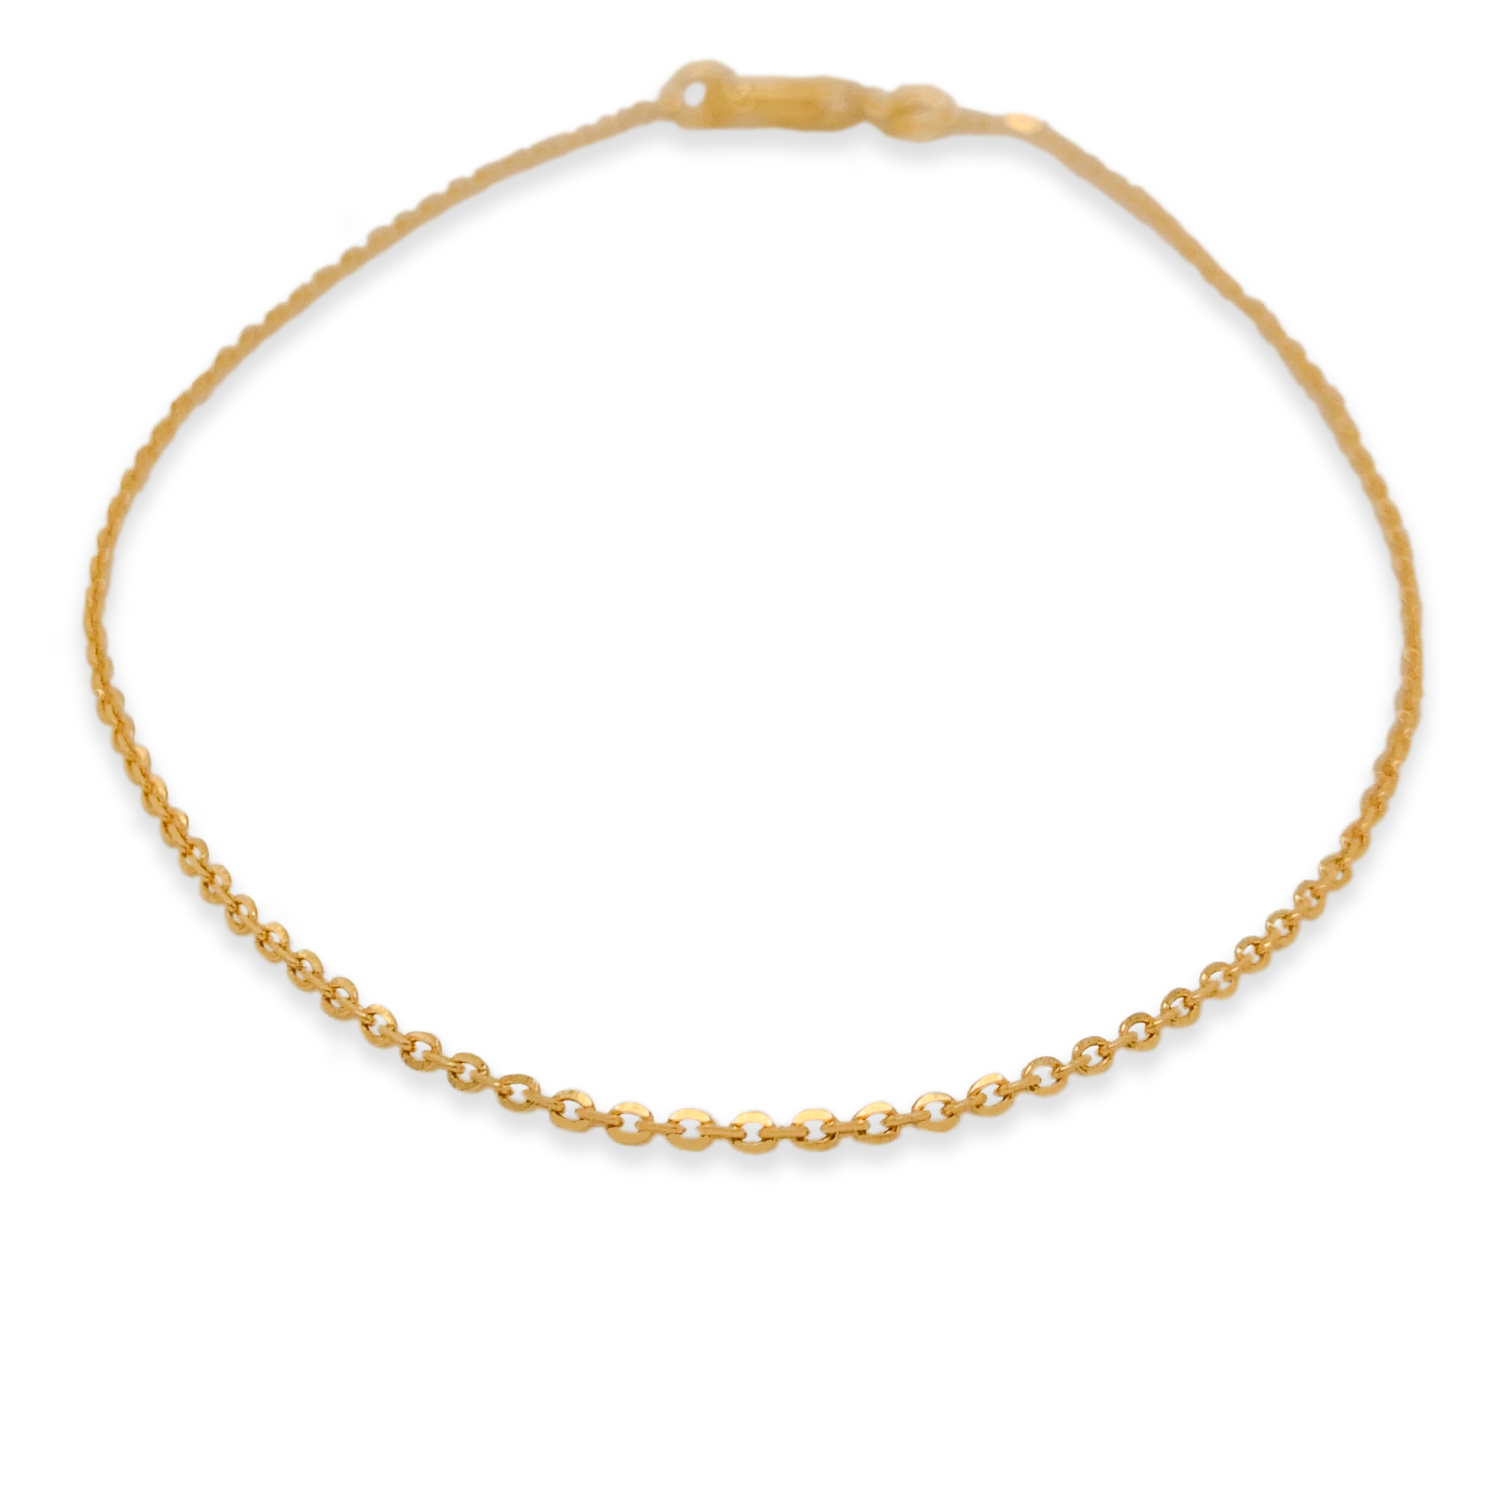 Amazon.com: YAZILIND 18K Dual Chain Spiral Type Women Girls Gold Plated  Chain Link Bracelet: Clothing, Shoes & Jewelry